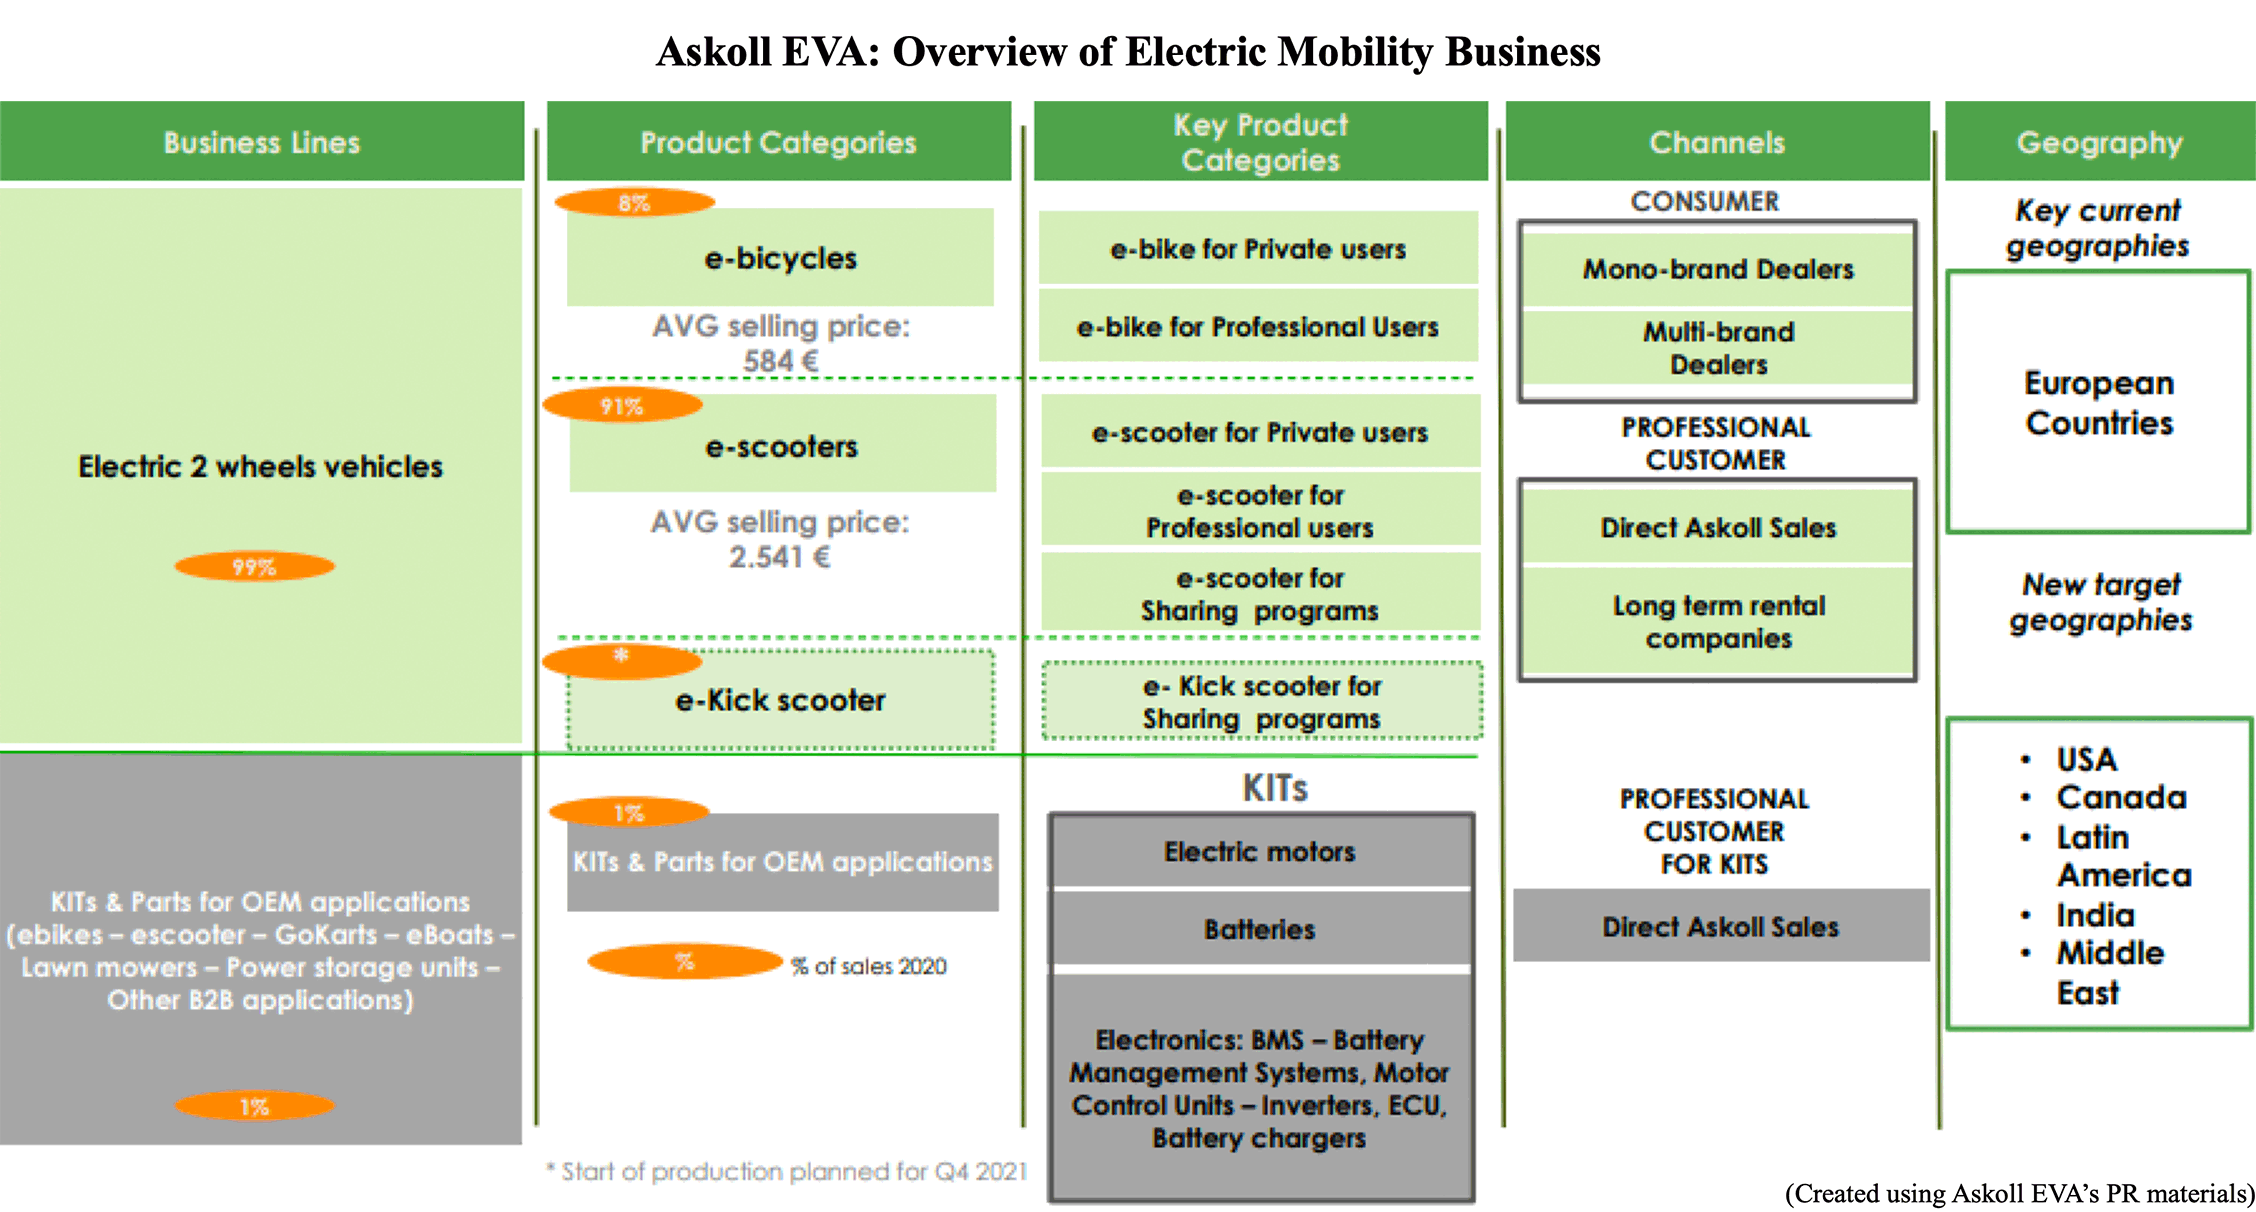 Askoll EVA: Overview of Electric Mobility Business